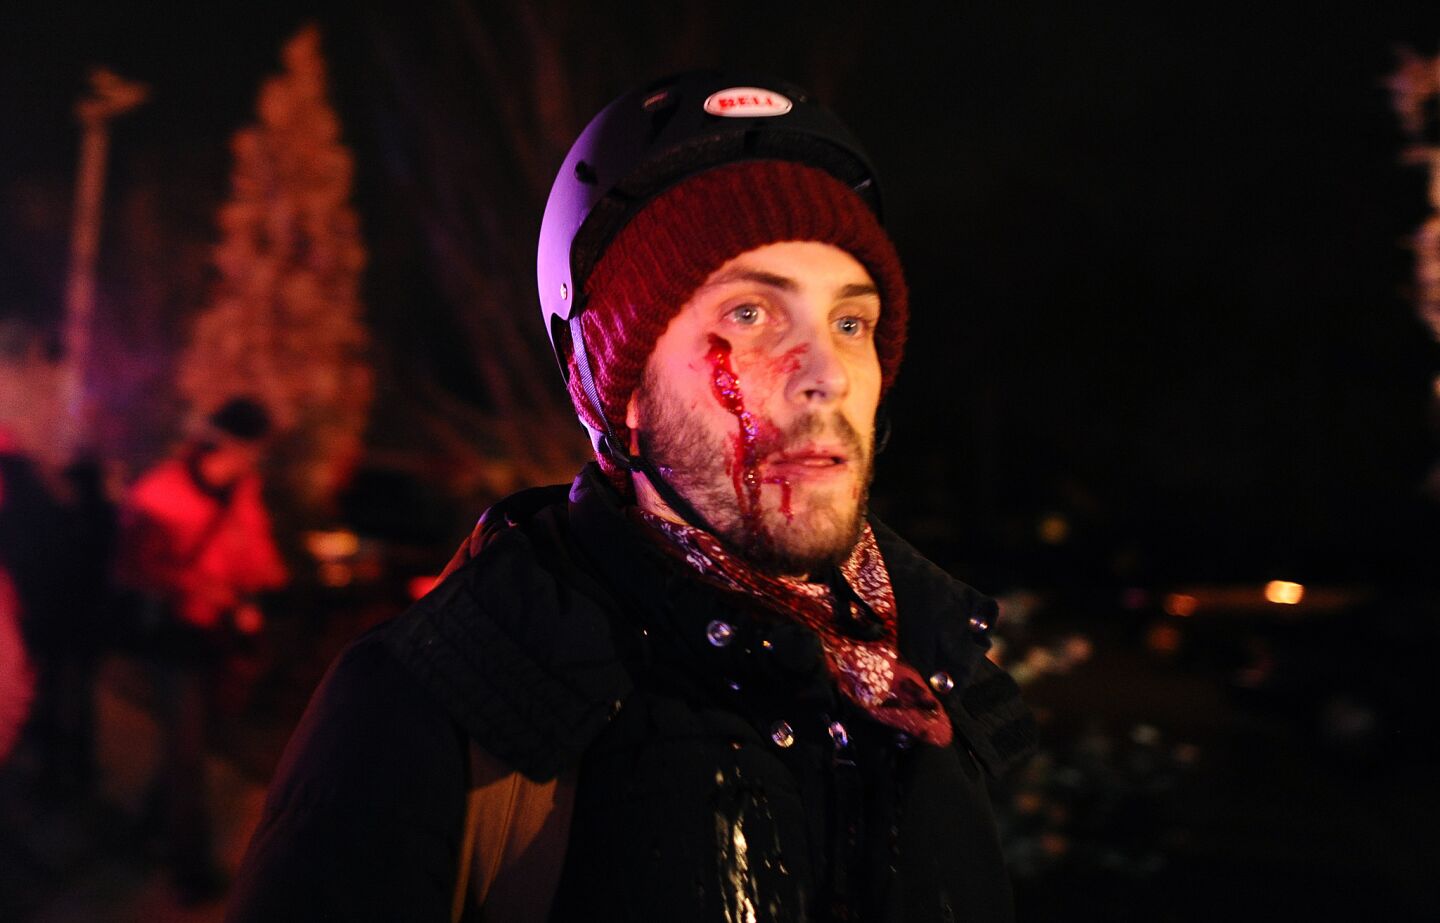 A journalist who was injured when rocks were thrown by protesters after the grand jury decision in Ferguson, Mo.